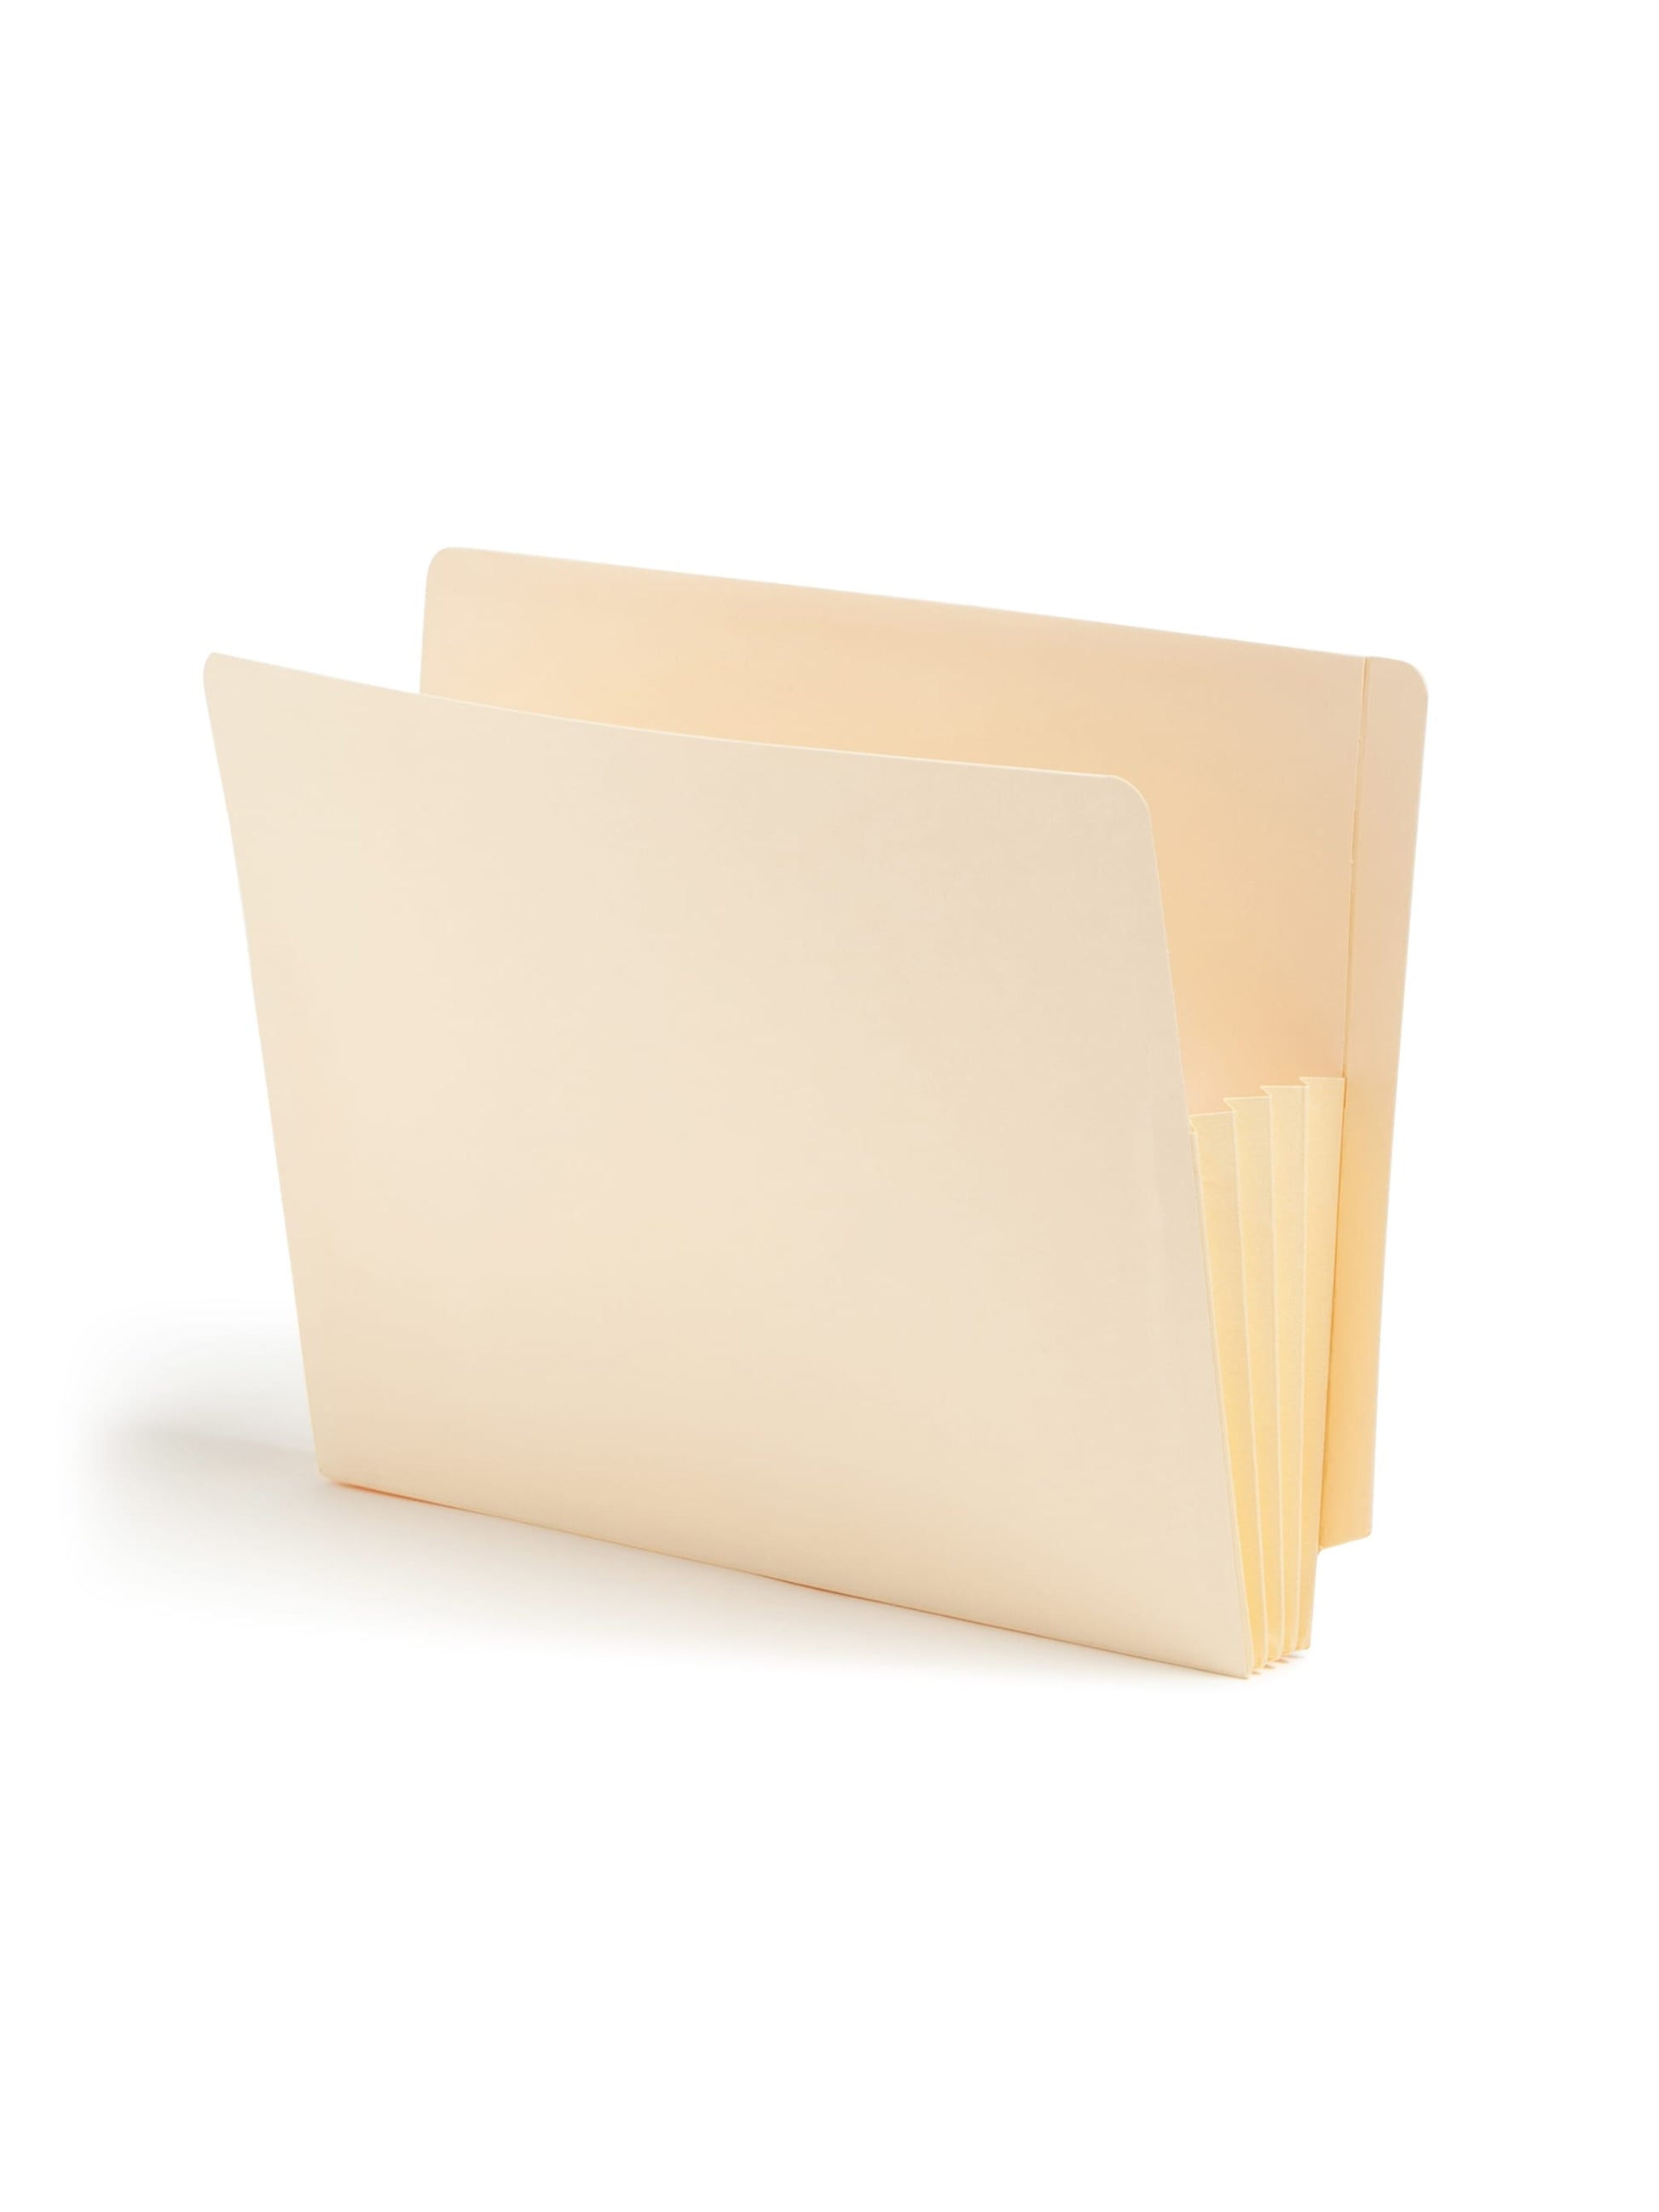 End Tab Convertible File Pockets, Straight-Cut Tab, 3-1/2 inch Expansion, Manila Color, Letter Size, Set of 0, 30086486751651